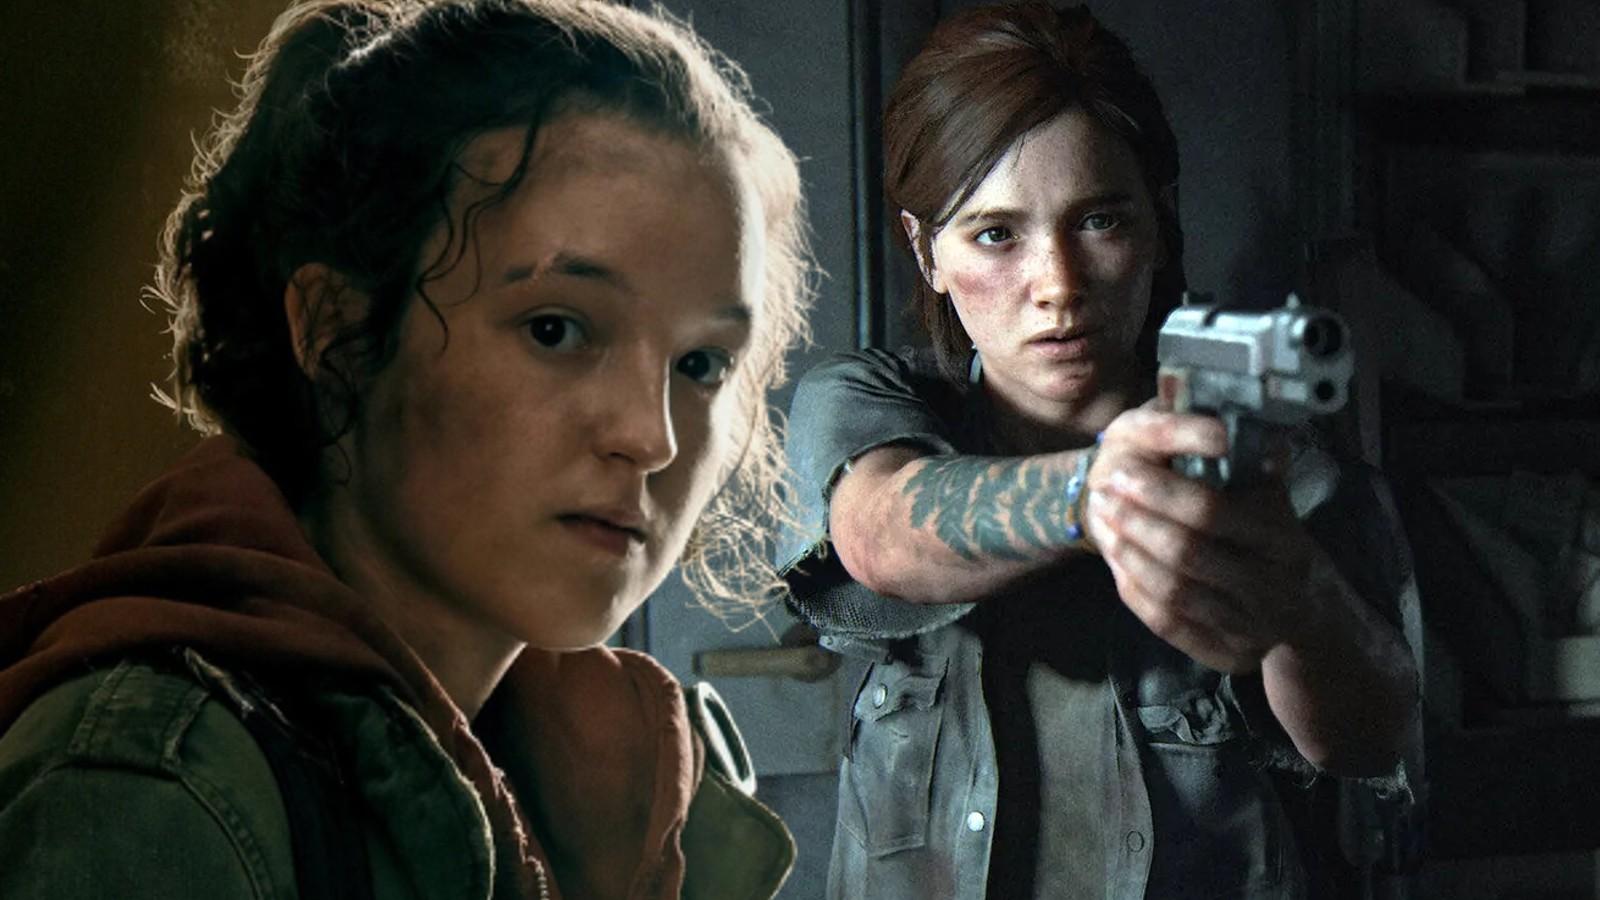 Bella Ramsey as Ellie and Ellie in The Last of Us TV show and game